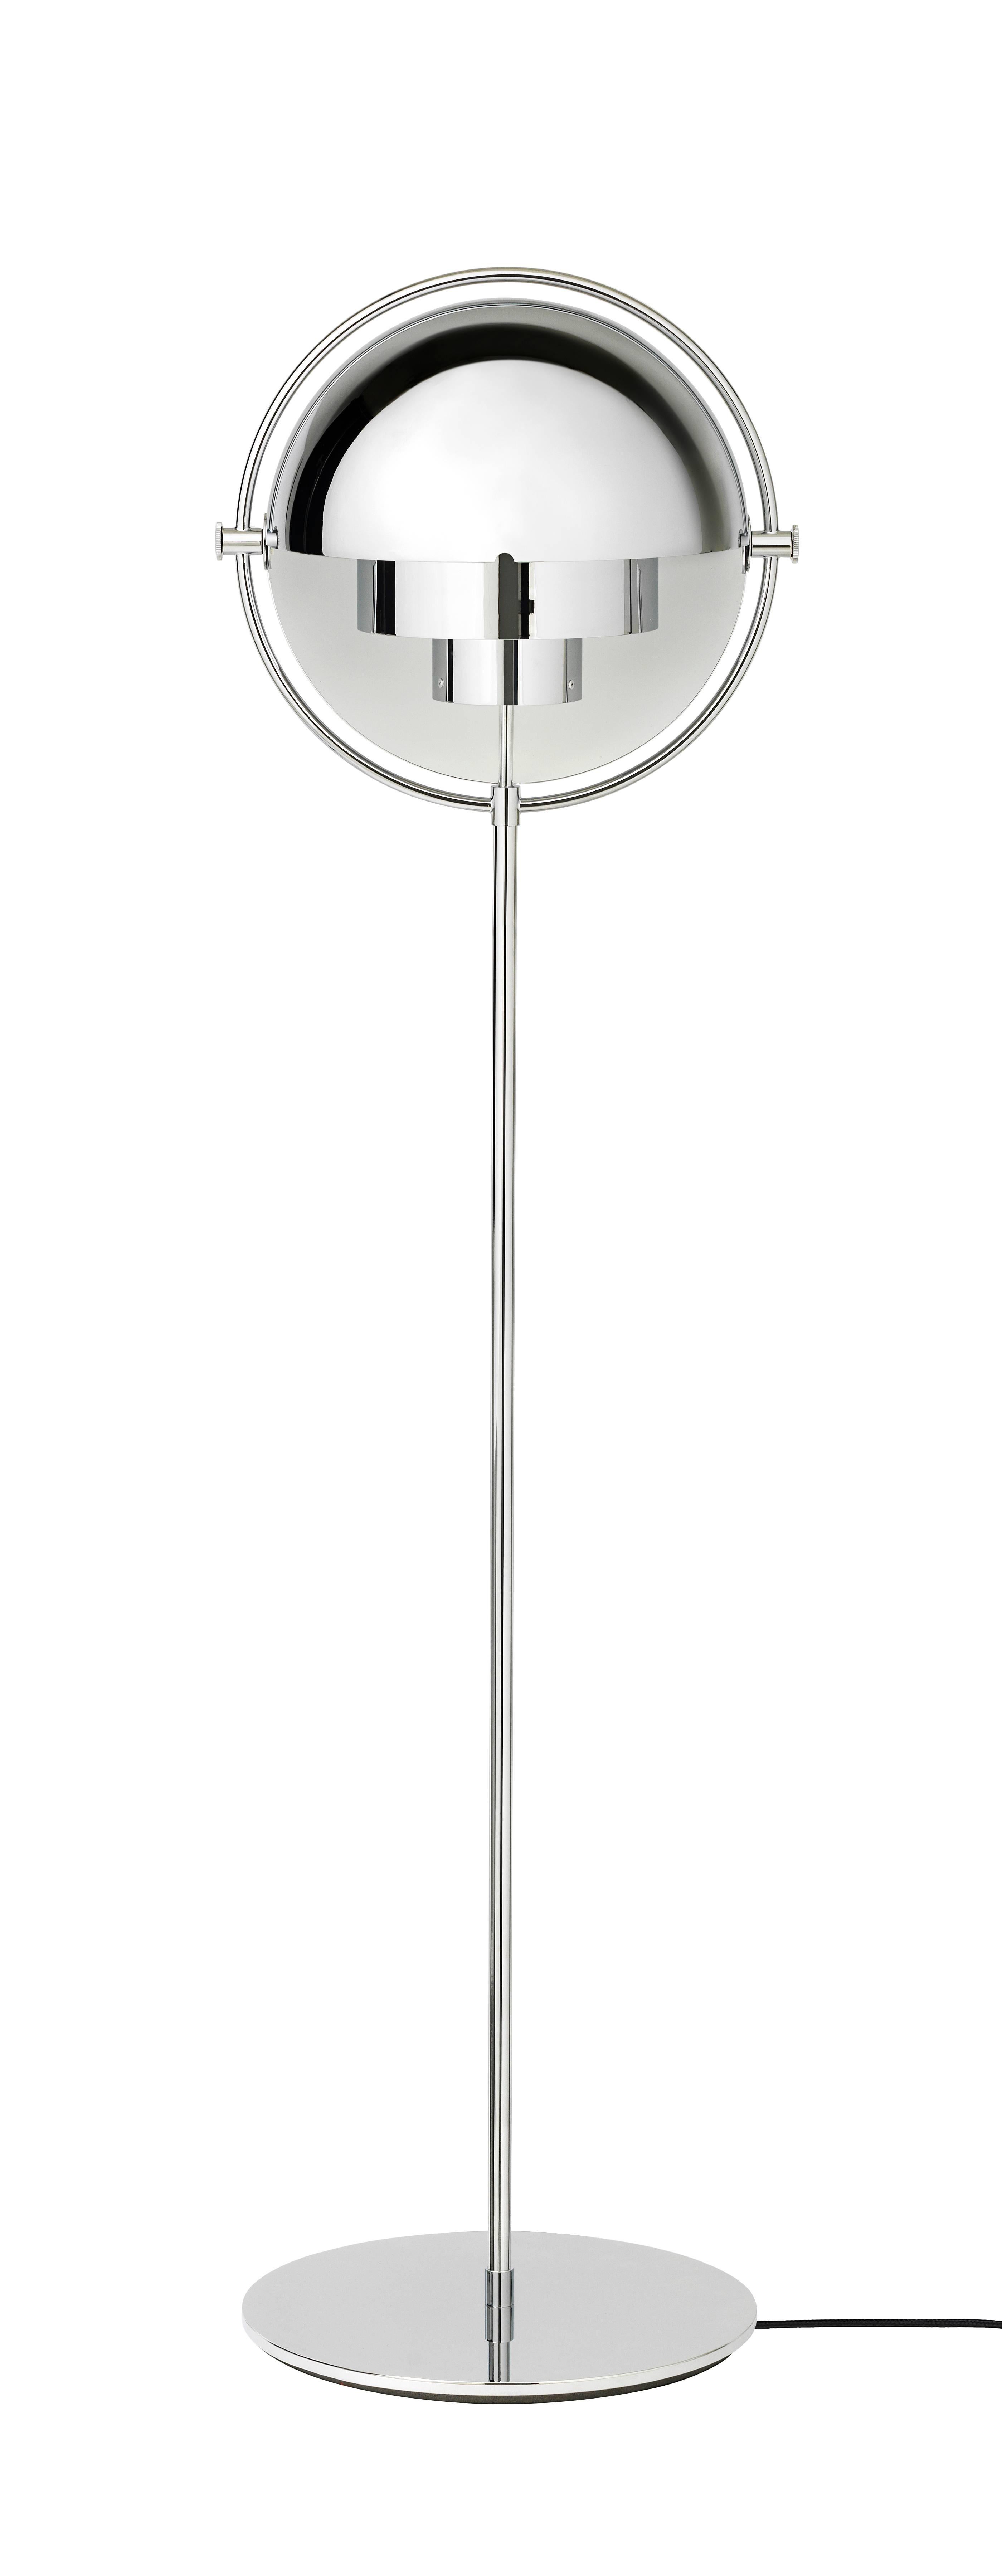 Louis Weisdorf 'Multi-Lite' floor lamp in chrome. Designed in 1972 by Weisdorf, this is an authorized re-edition by GUBI of Denmark who meticulously reproduces his work with scrupulous attention to detail and materials that are faithful to the